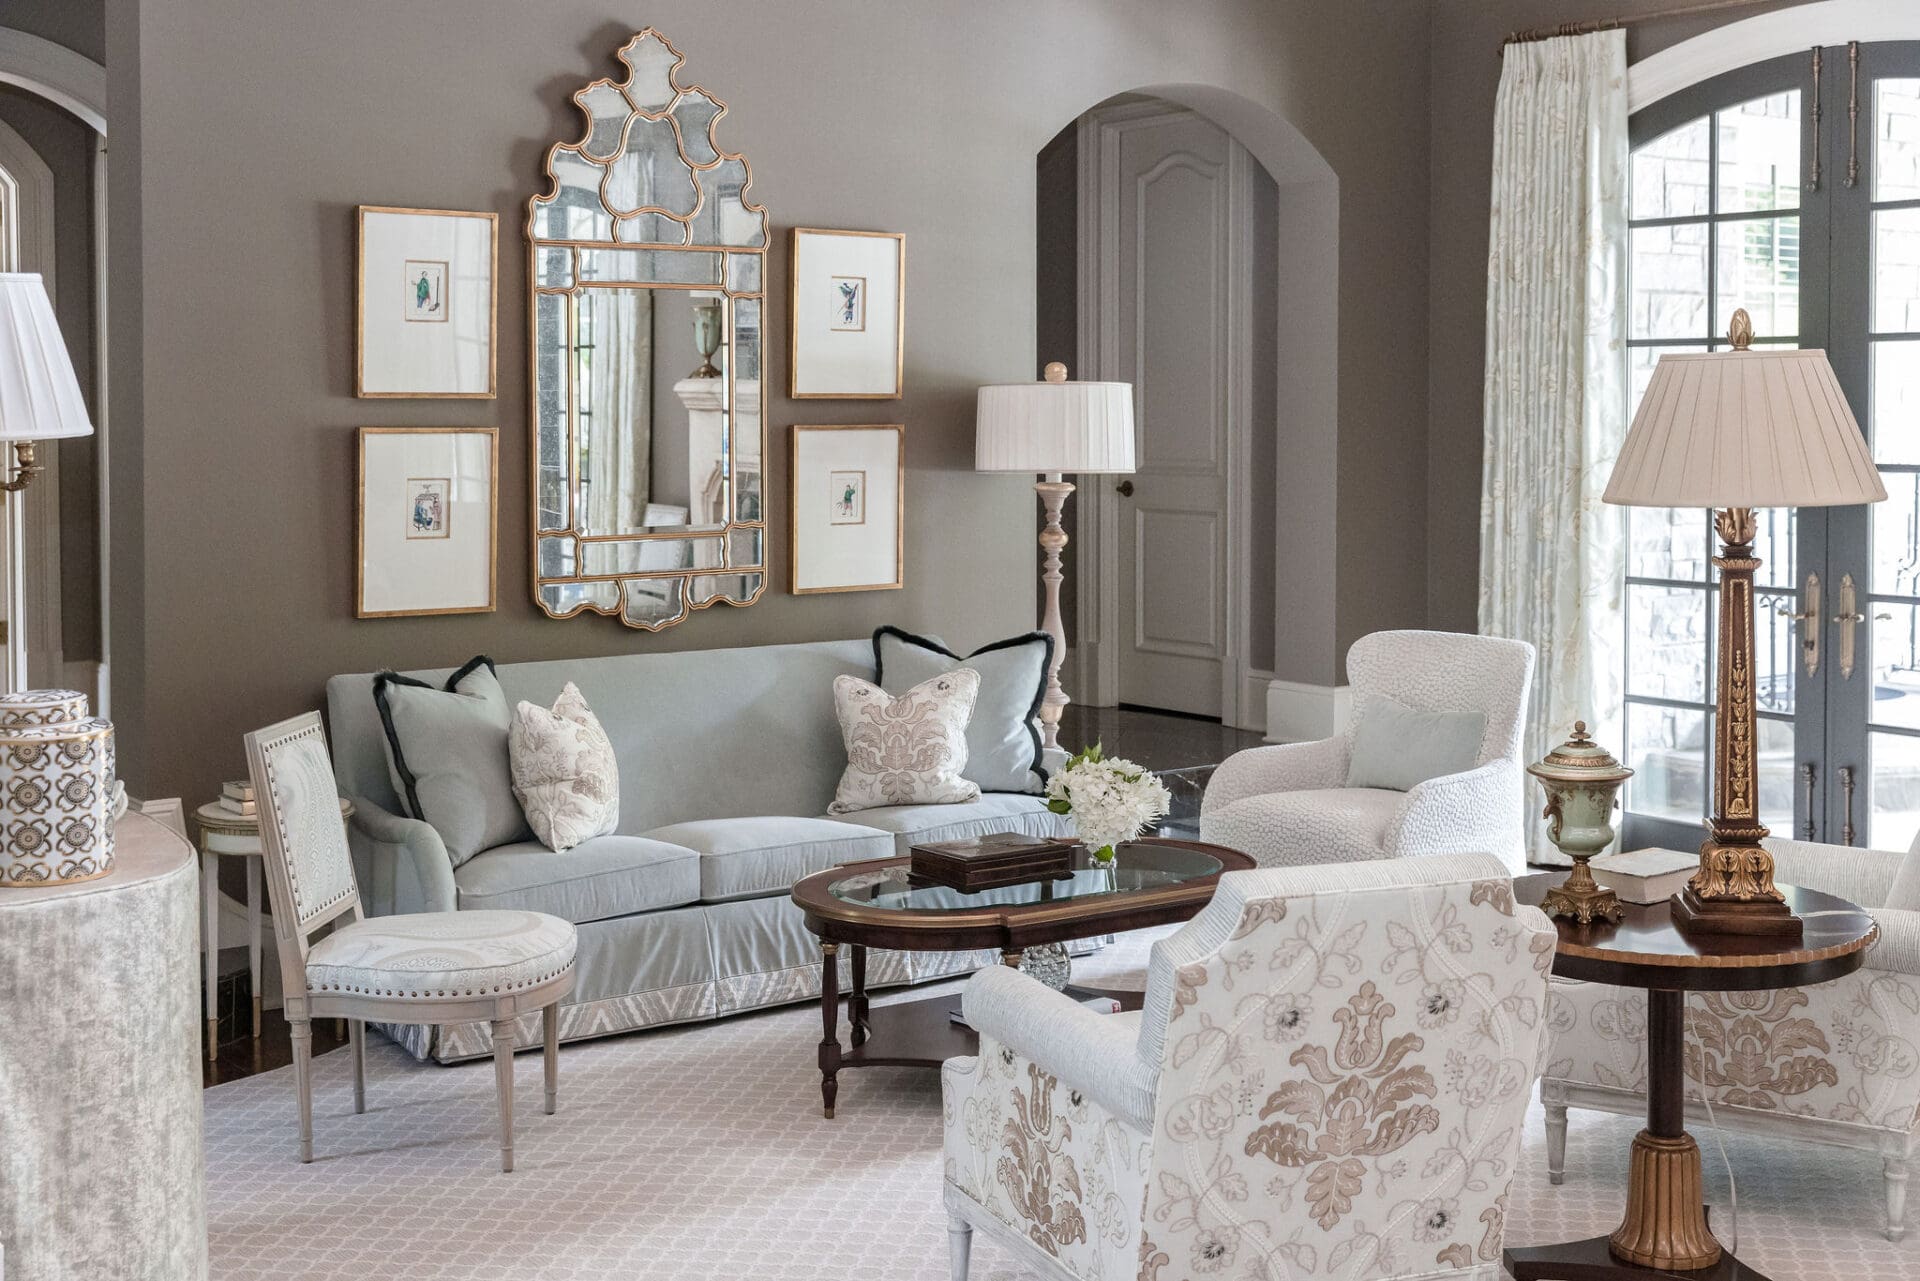 Study in Formality - Eric Ross Interiors